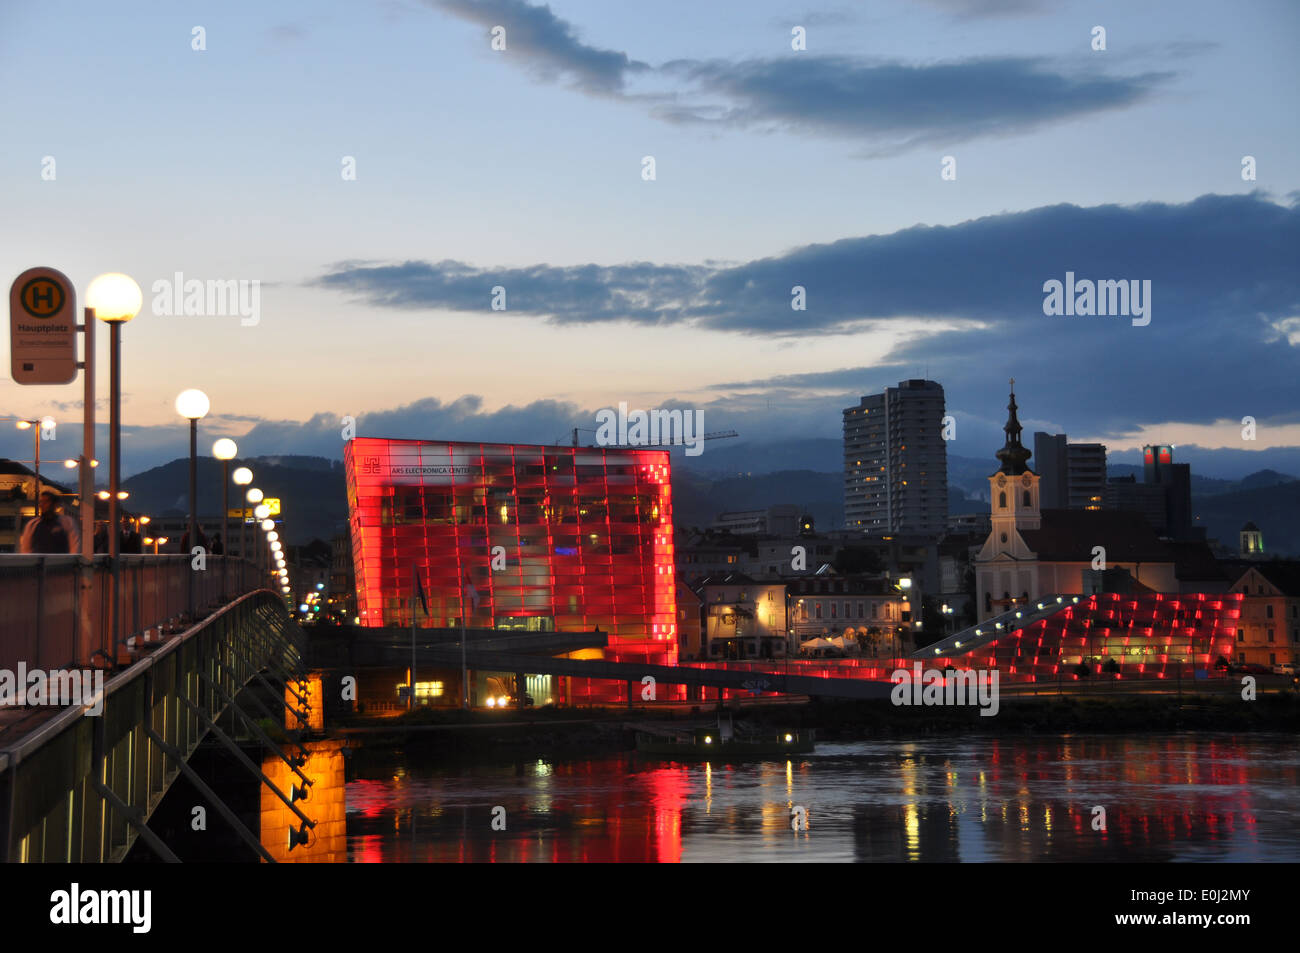 The Ars Electronica Center at night, Linz. Stock Photo